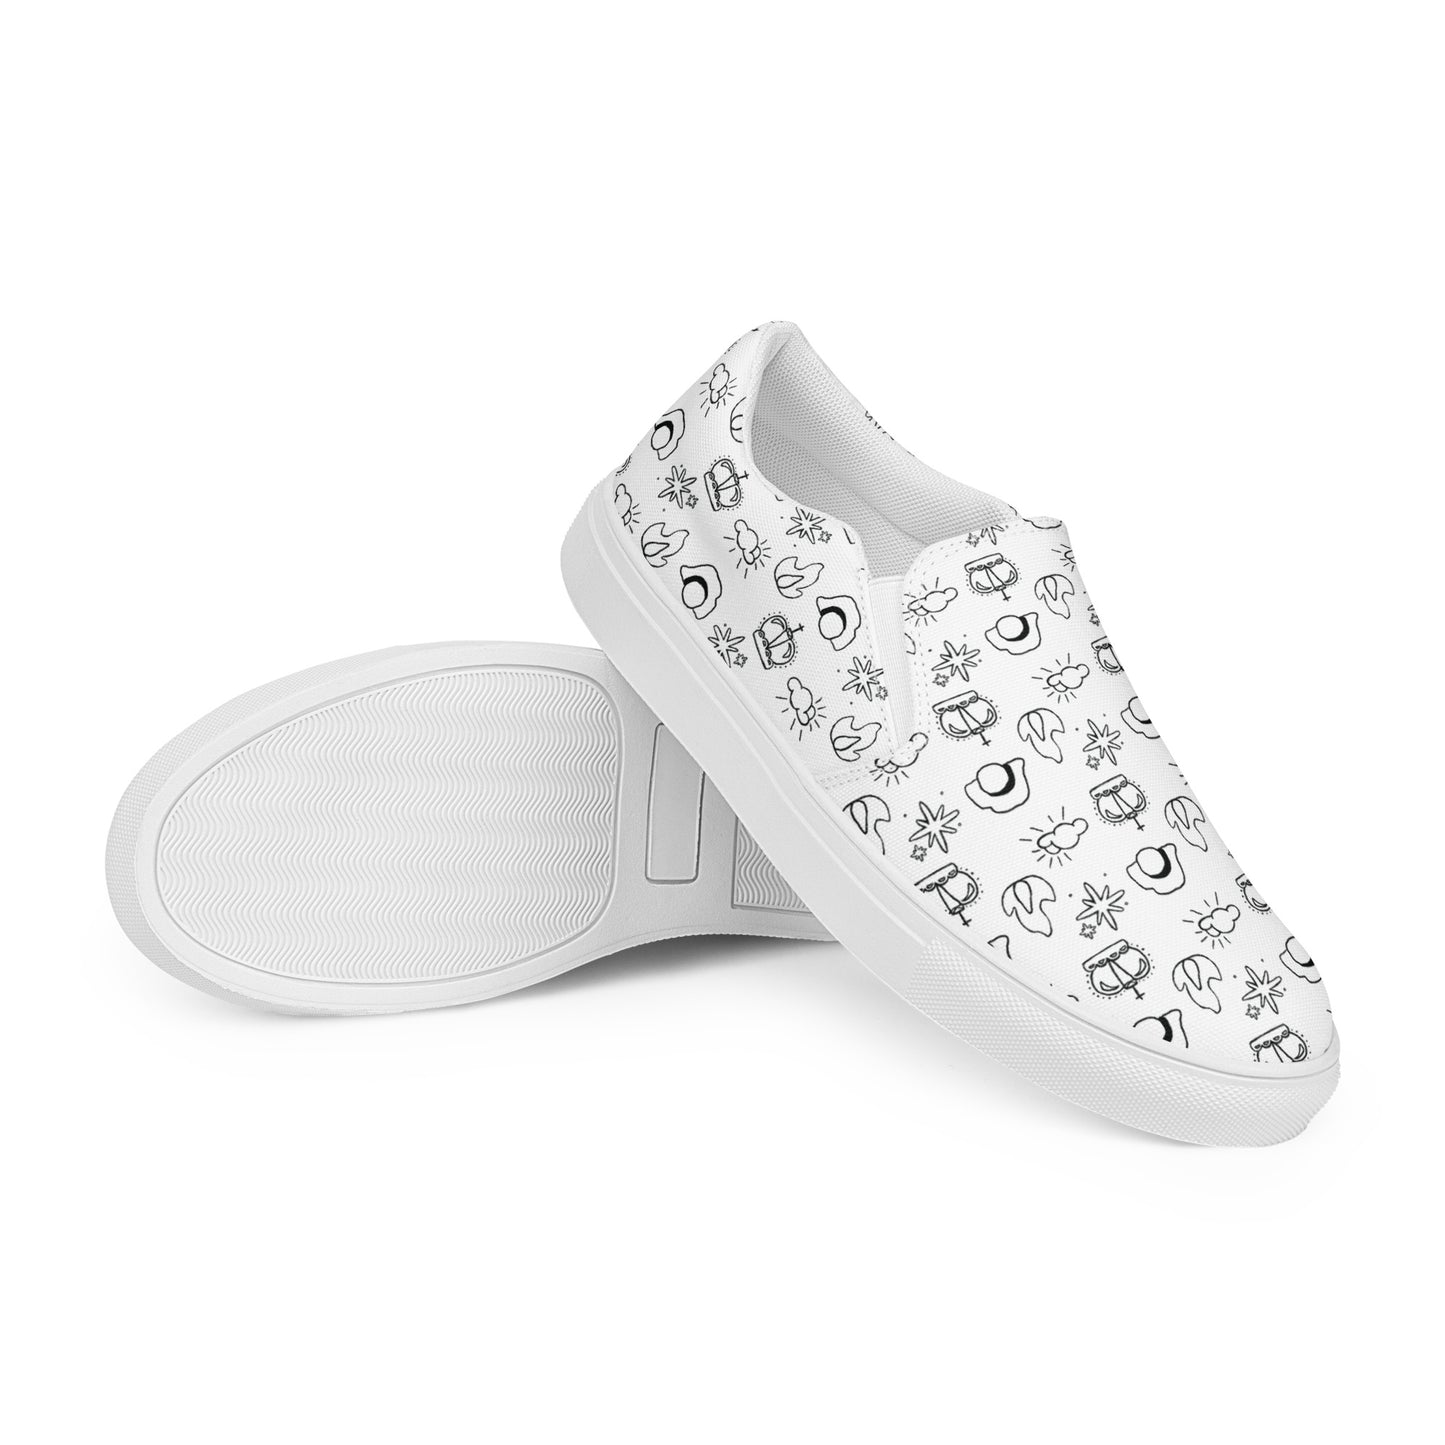 "Walking with the Saints | Glorious Mysteries" – Men’s Slip-On's